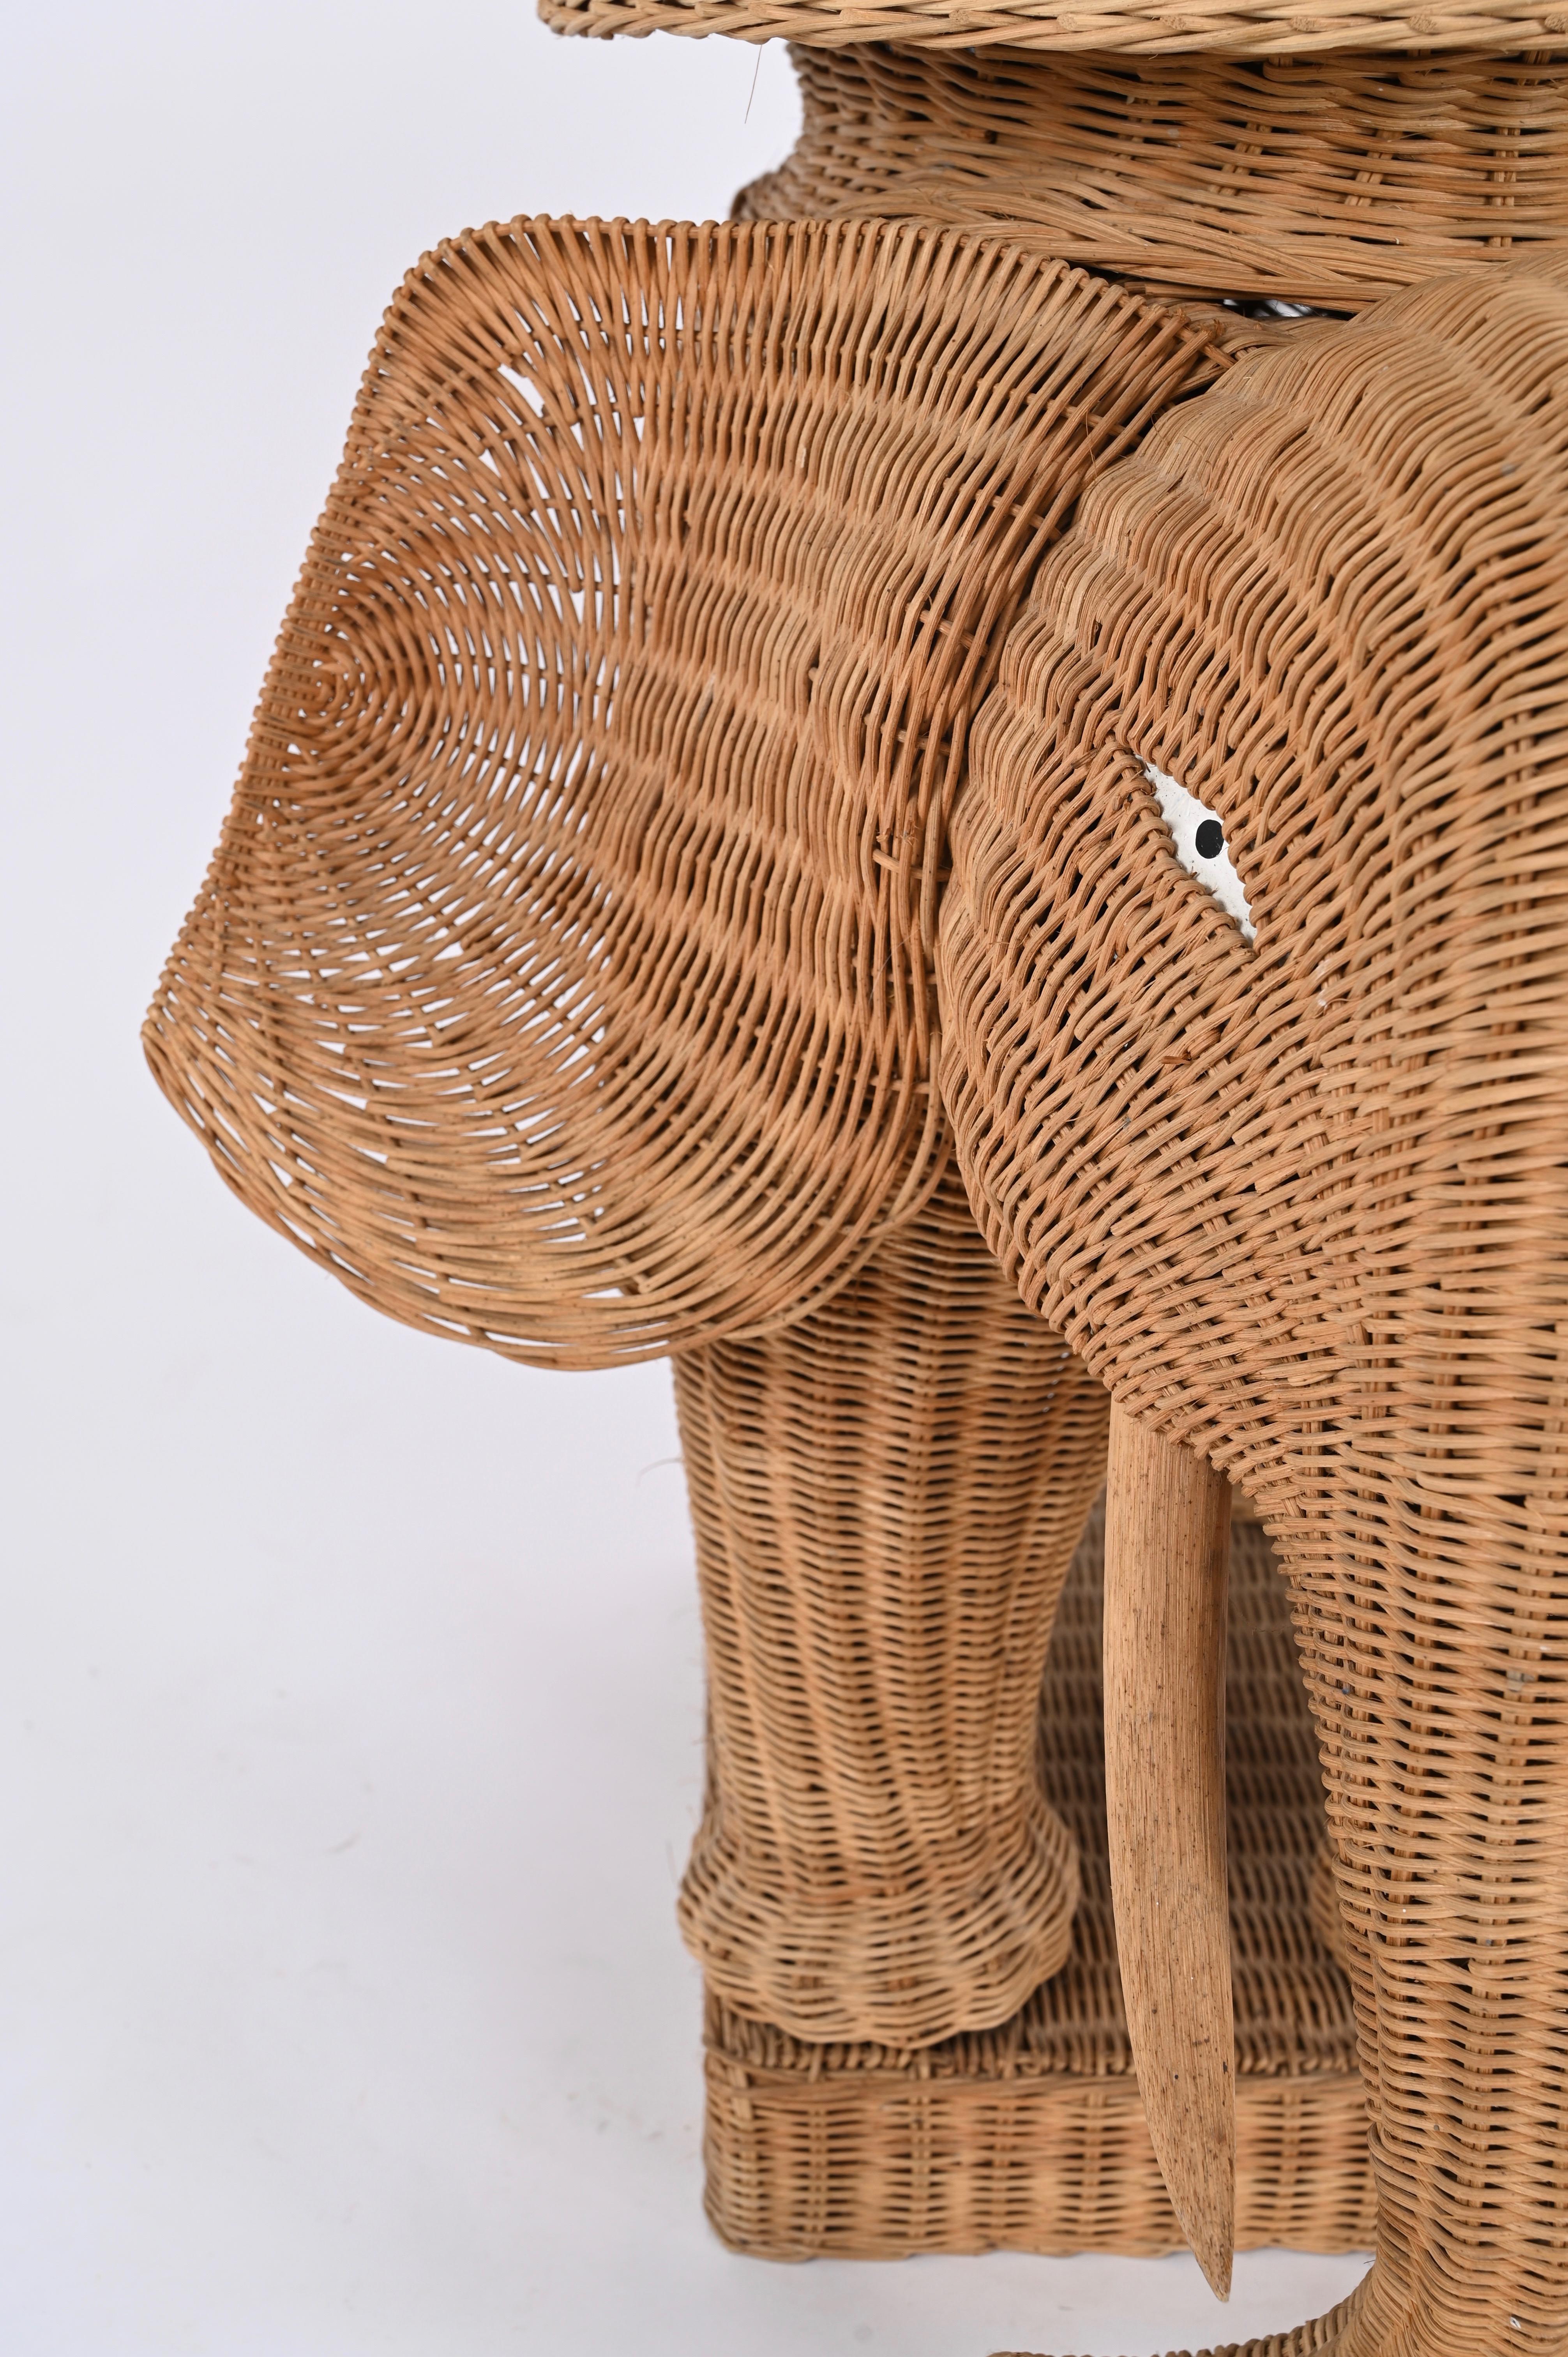 Mid-Century Modern Large Rattan and Wicker Elephant Side Table by Vivai del Sud, Italy 1970s